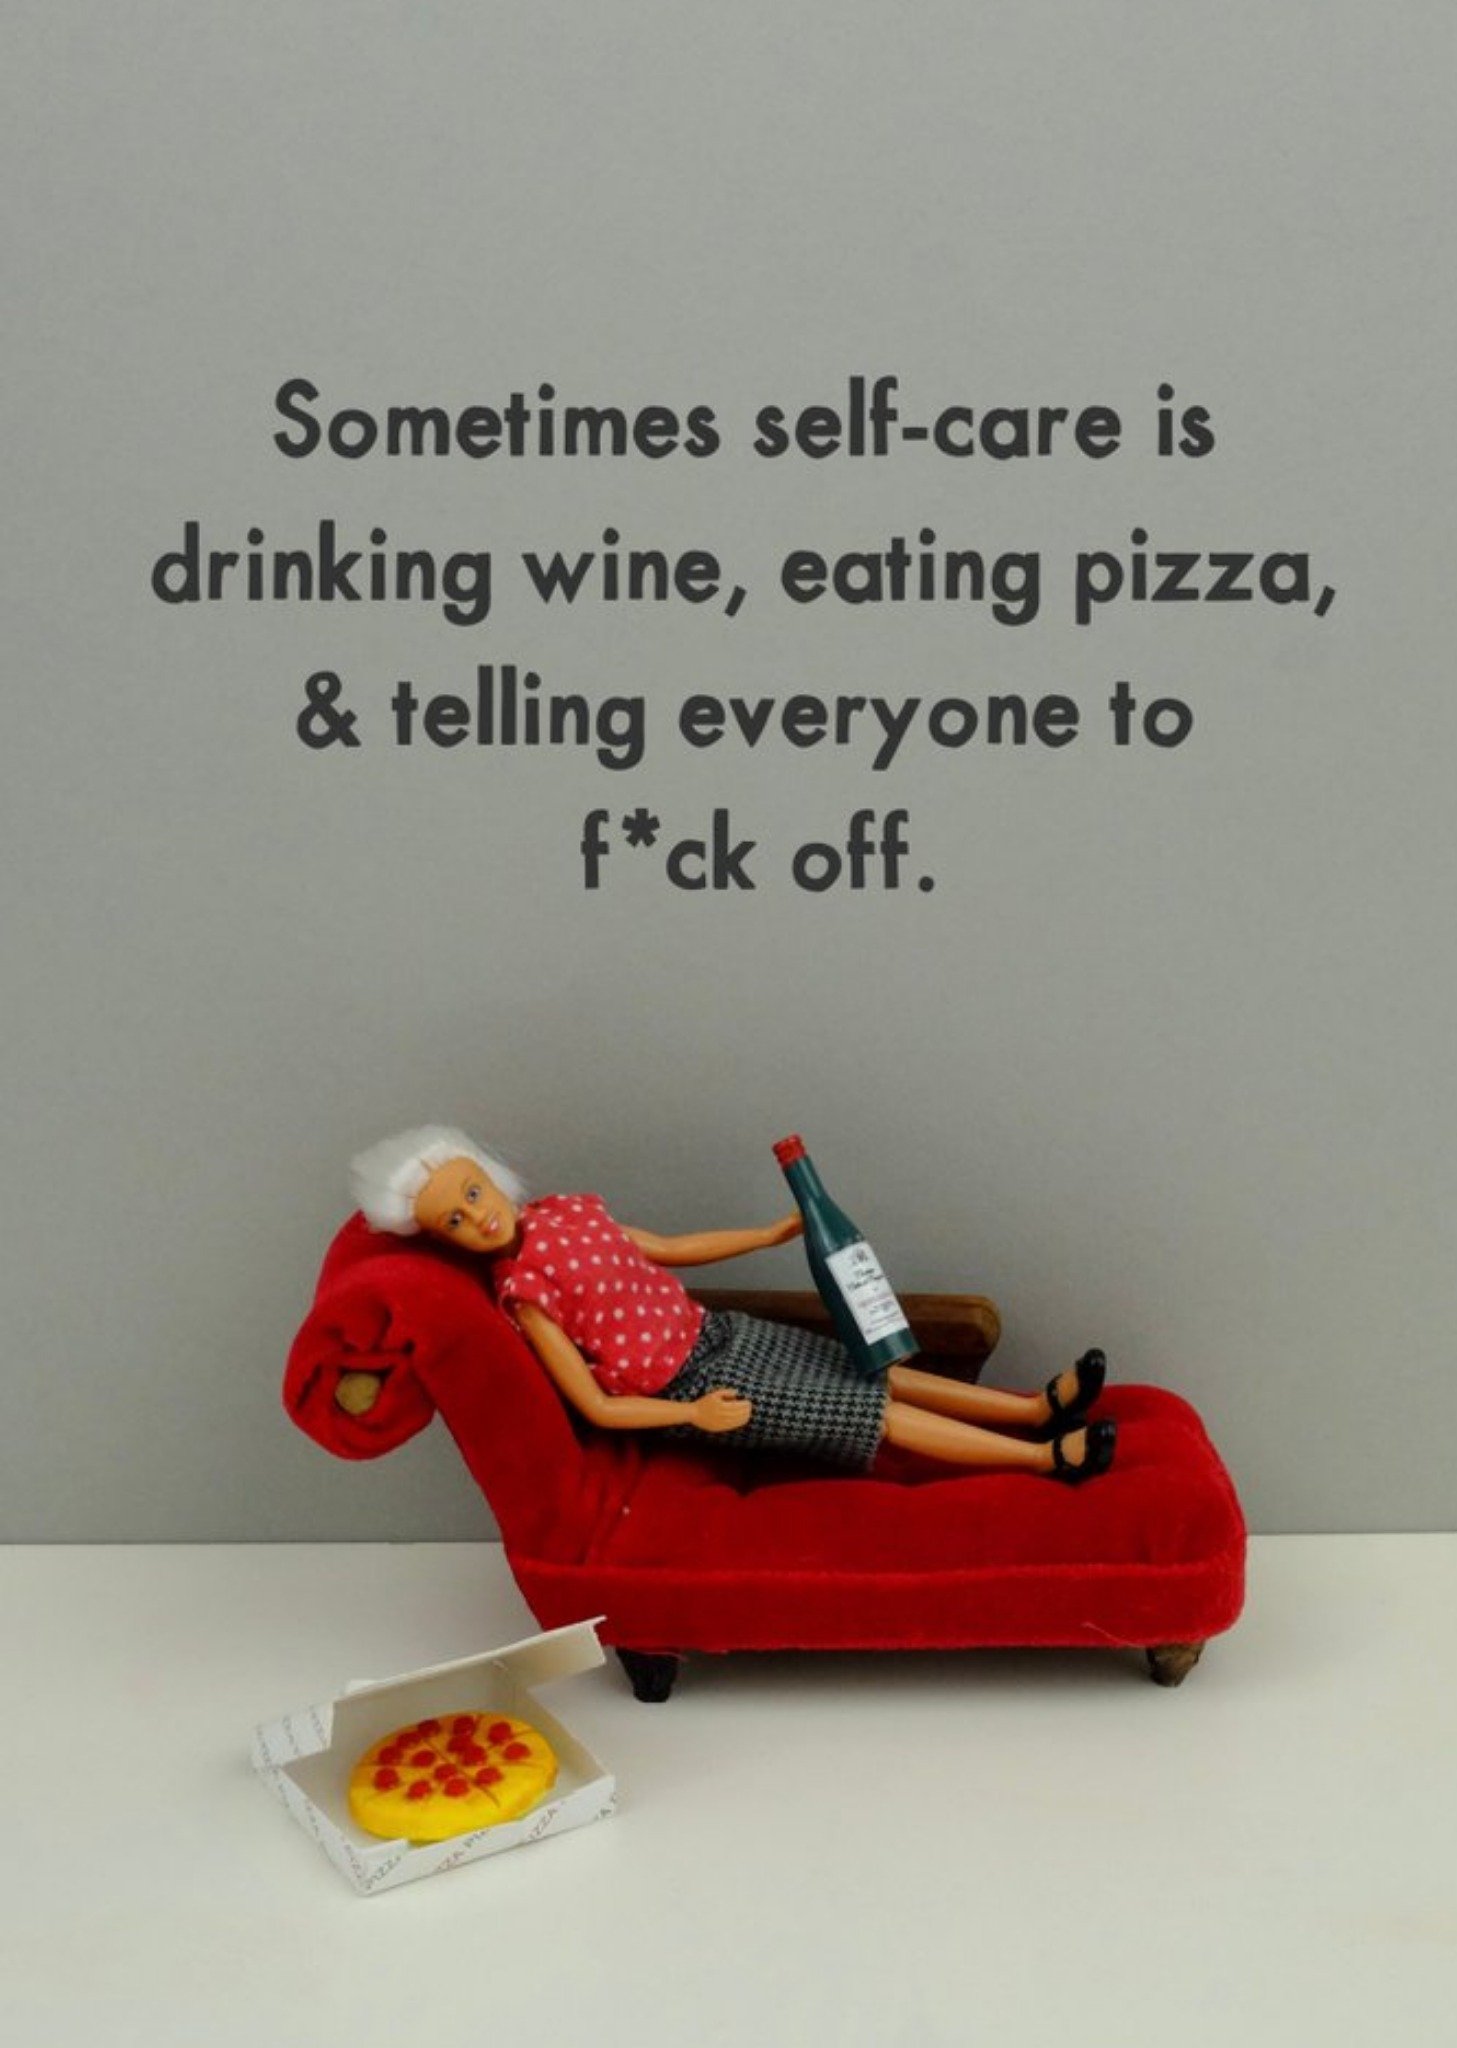 Bold And Bright Funny Photographic Image Of A Doll Drinking Wine And Eating Pizza Self-Care Card, La